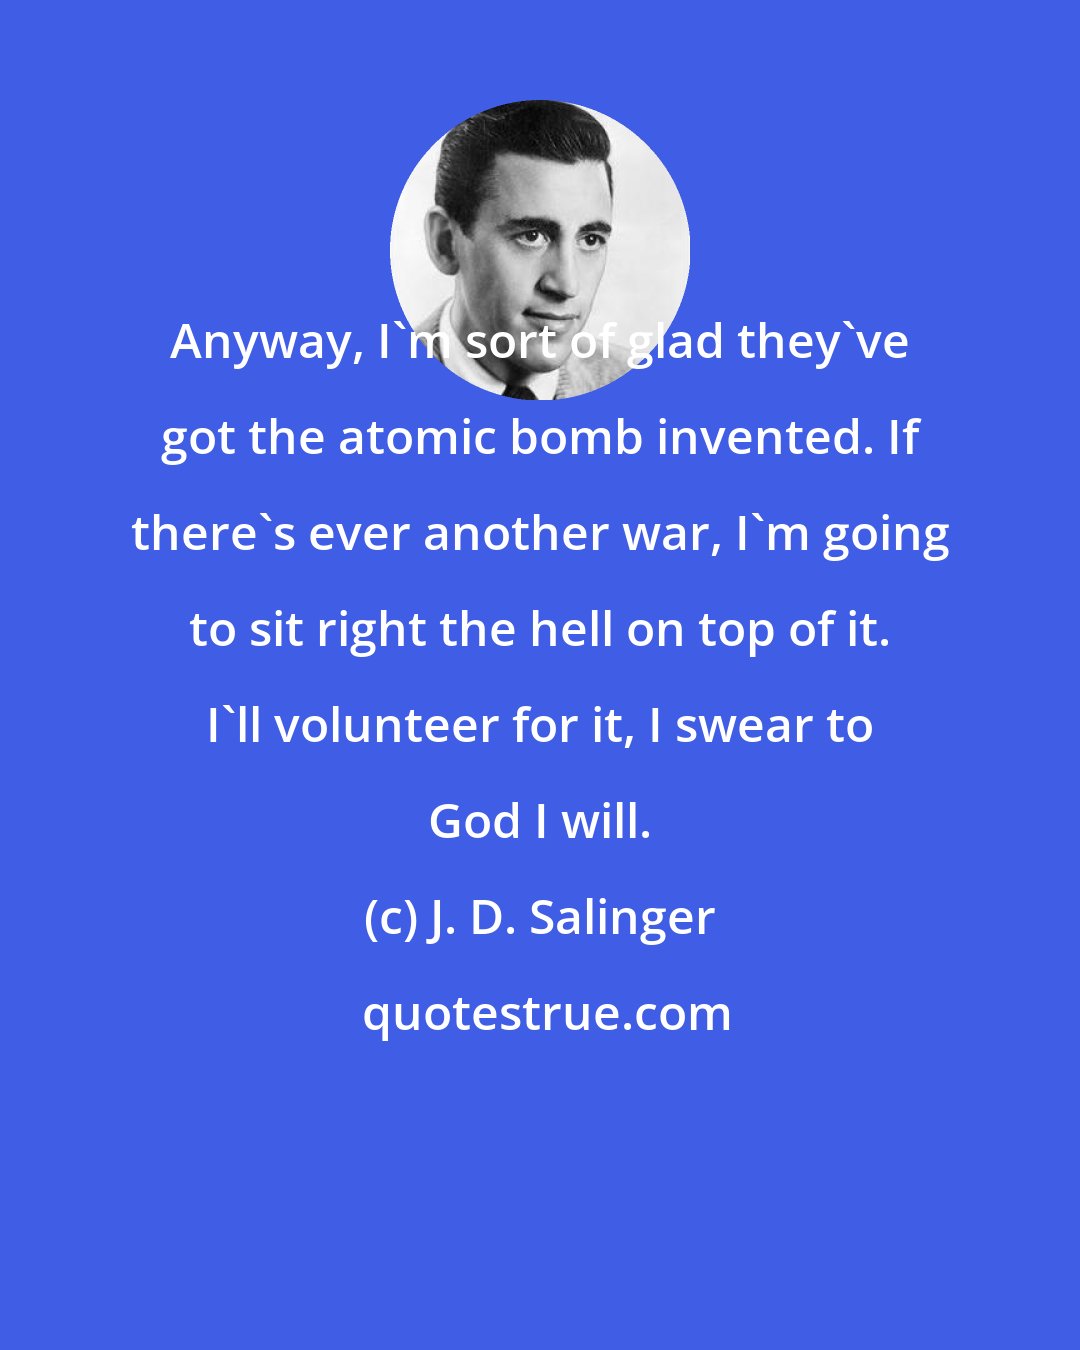 J. D. Salinger: Anyway, I'm sort of glad they've got the atomic bomb invented. If there's ever another war, I'm going to sit right the hell on top of it. I'll volunteer for it, I swear to God I will.